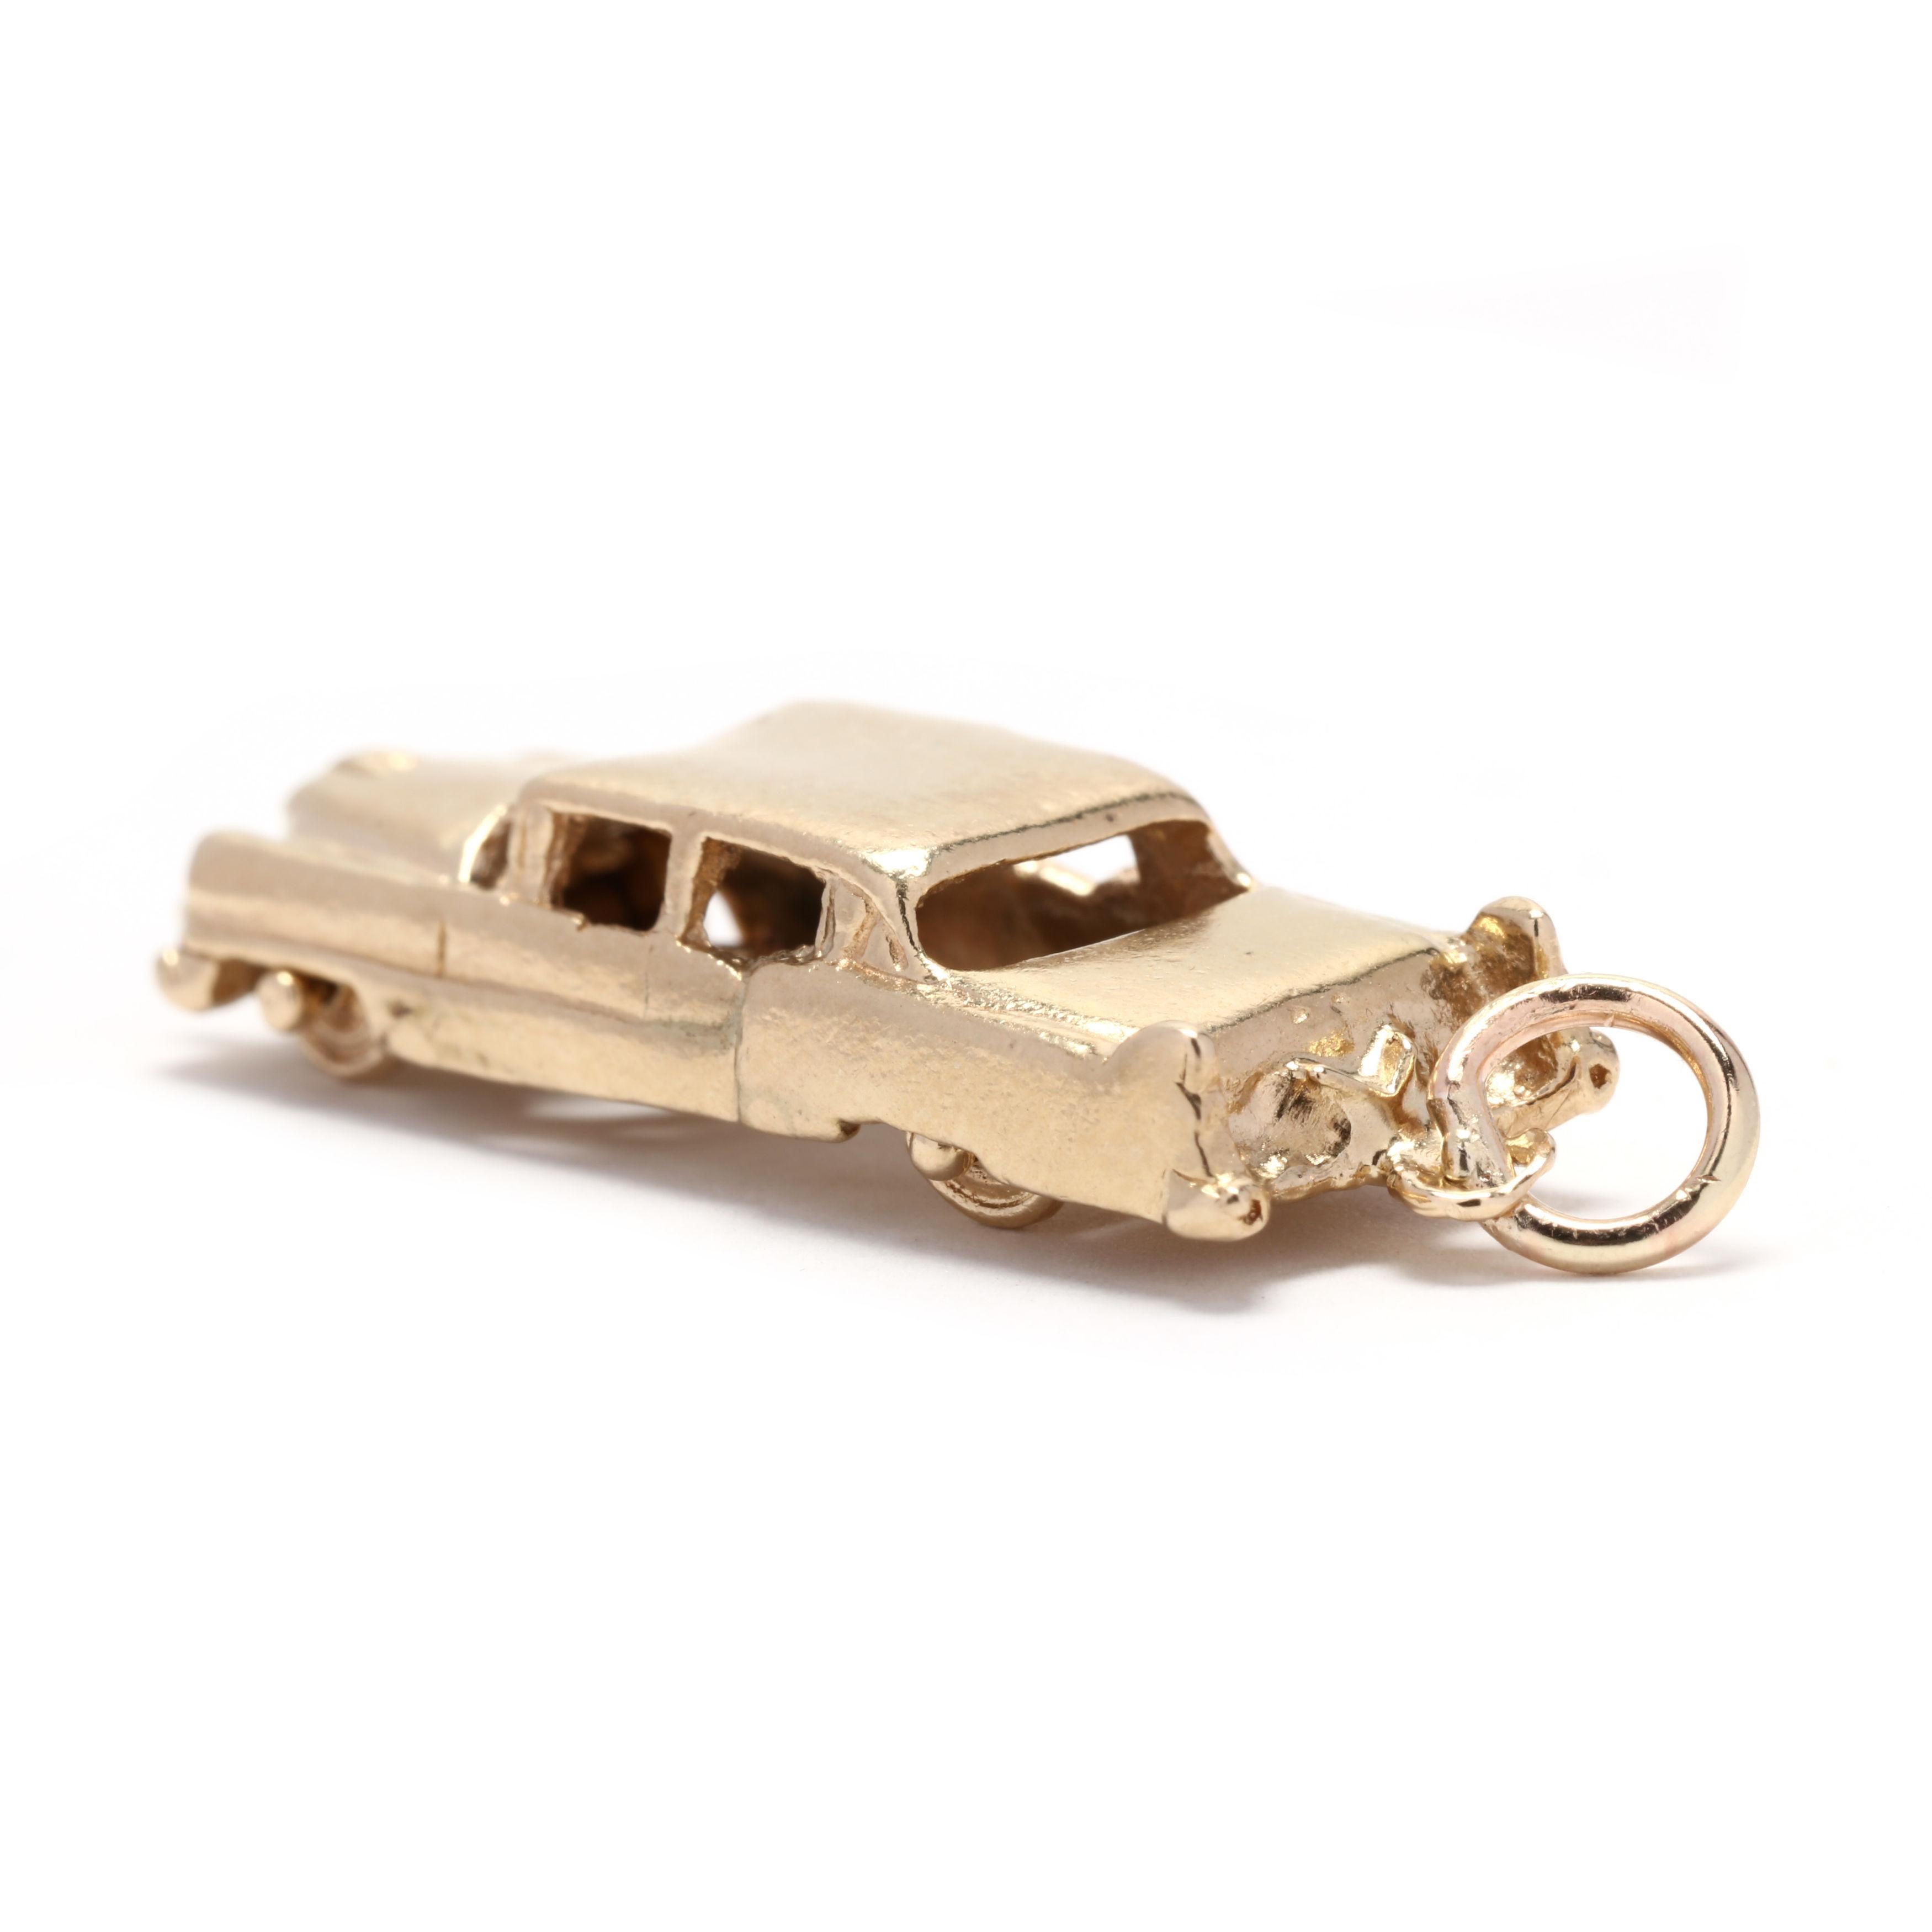 A vintage 14 karat yellow gold large car charm with spinning wheels.



Length: 1 3/8 in.



Width: 7/16 in.



Weight: 3.8 dwts.